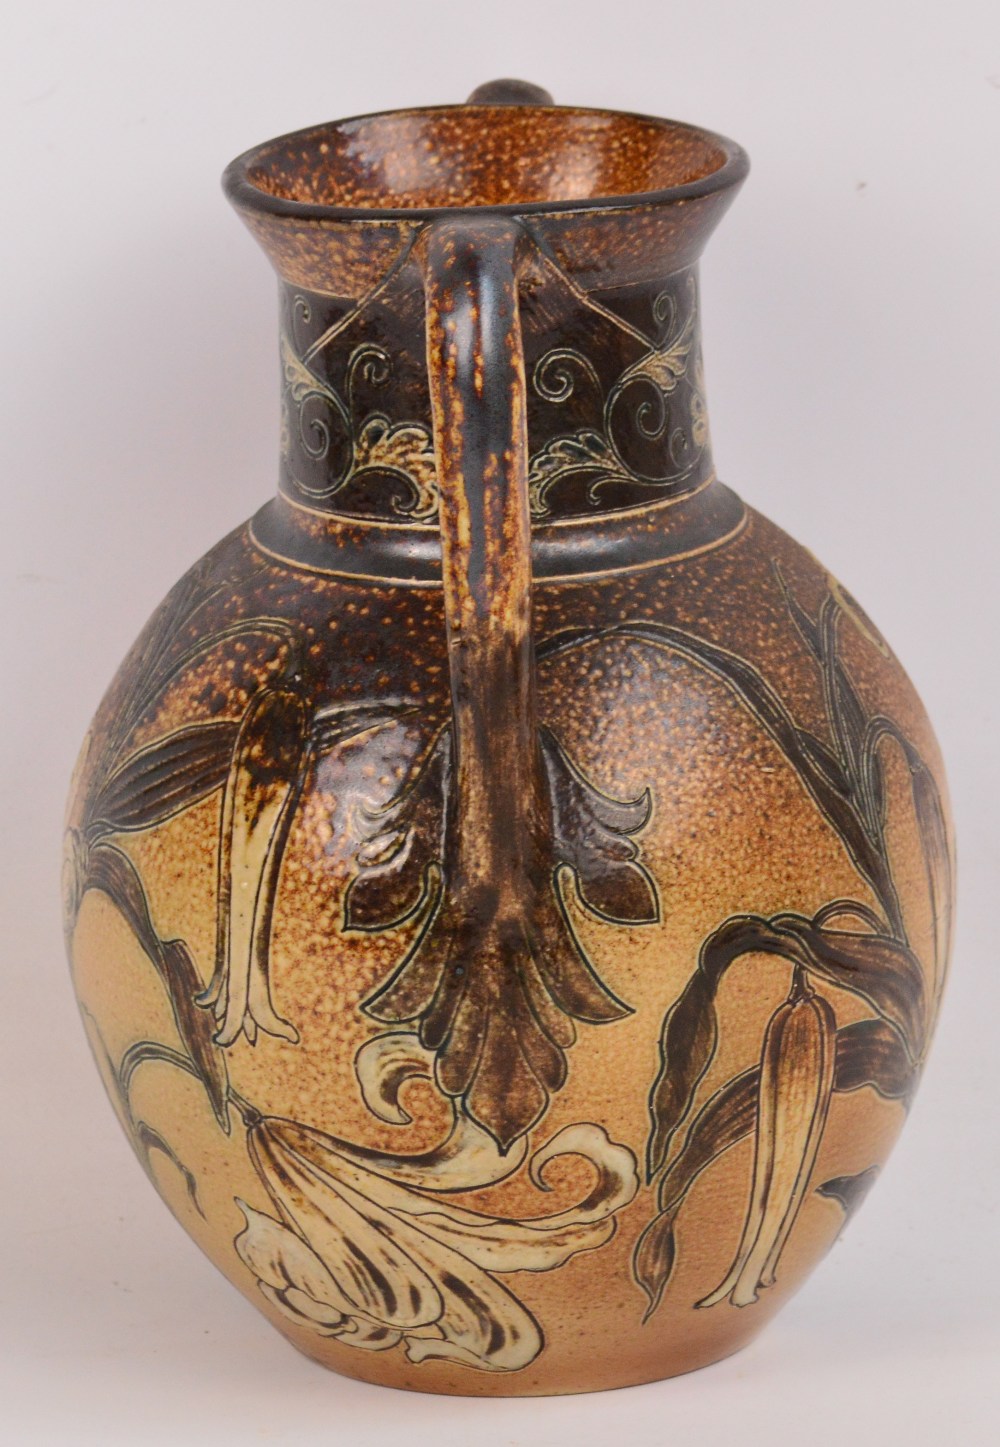 ROBERT WALLACE MARTIN (1843-1924) for Martin Brothers, London and Southall; a salt glazed vase - Image 5 of 7